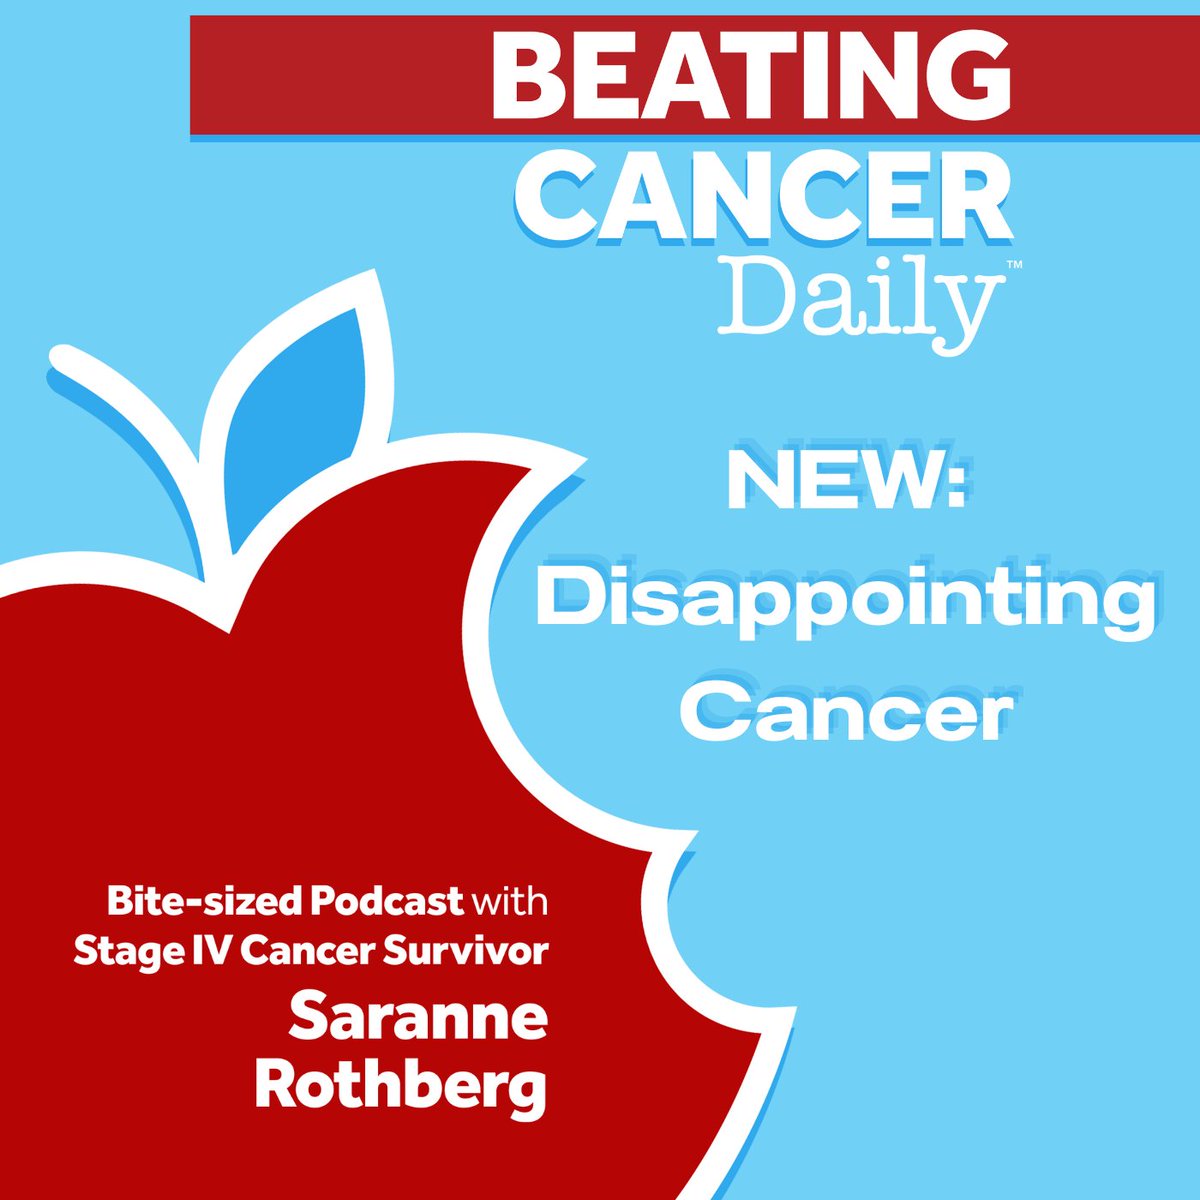 Today on #BeatingCancerDaily, Fan Favorite: Disappointing Cancer
Listen wherever you listen to podcasts. 
ComedyCures.org

#ComedyCures #LaughDaily #InstaLaugh #laughtherapy #NonProfit #nonprofitlife #standupcomedian #survivor #remission #cancersurvivor #cancertreatment